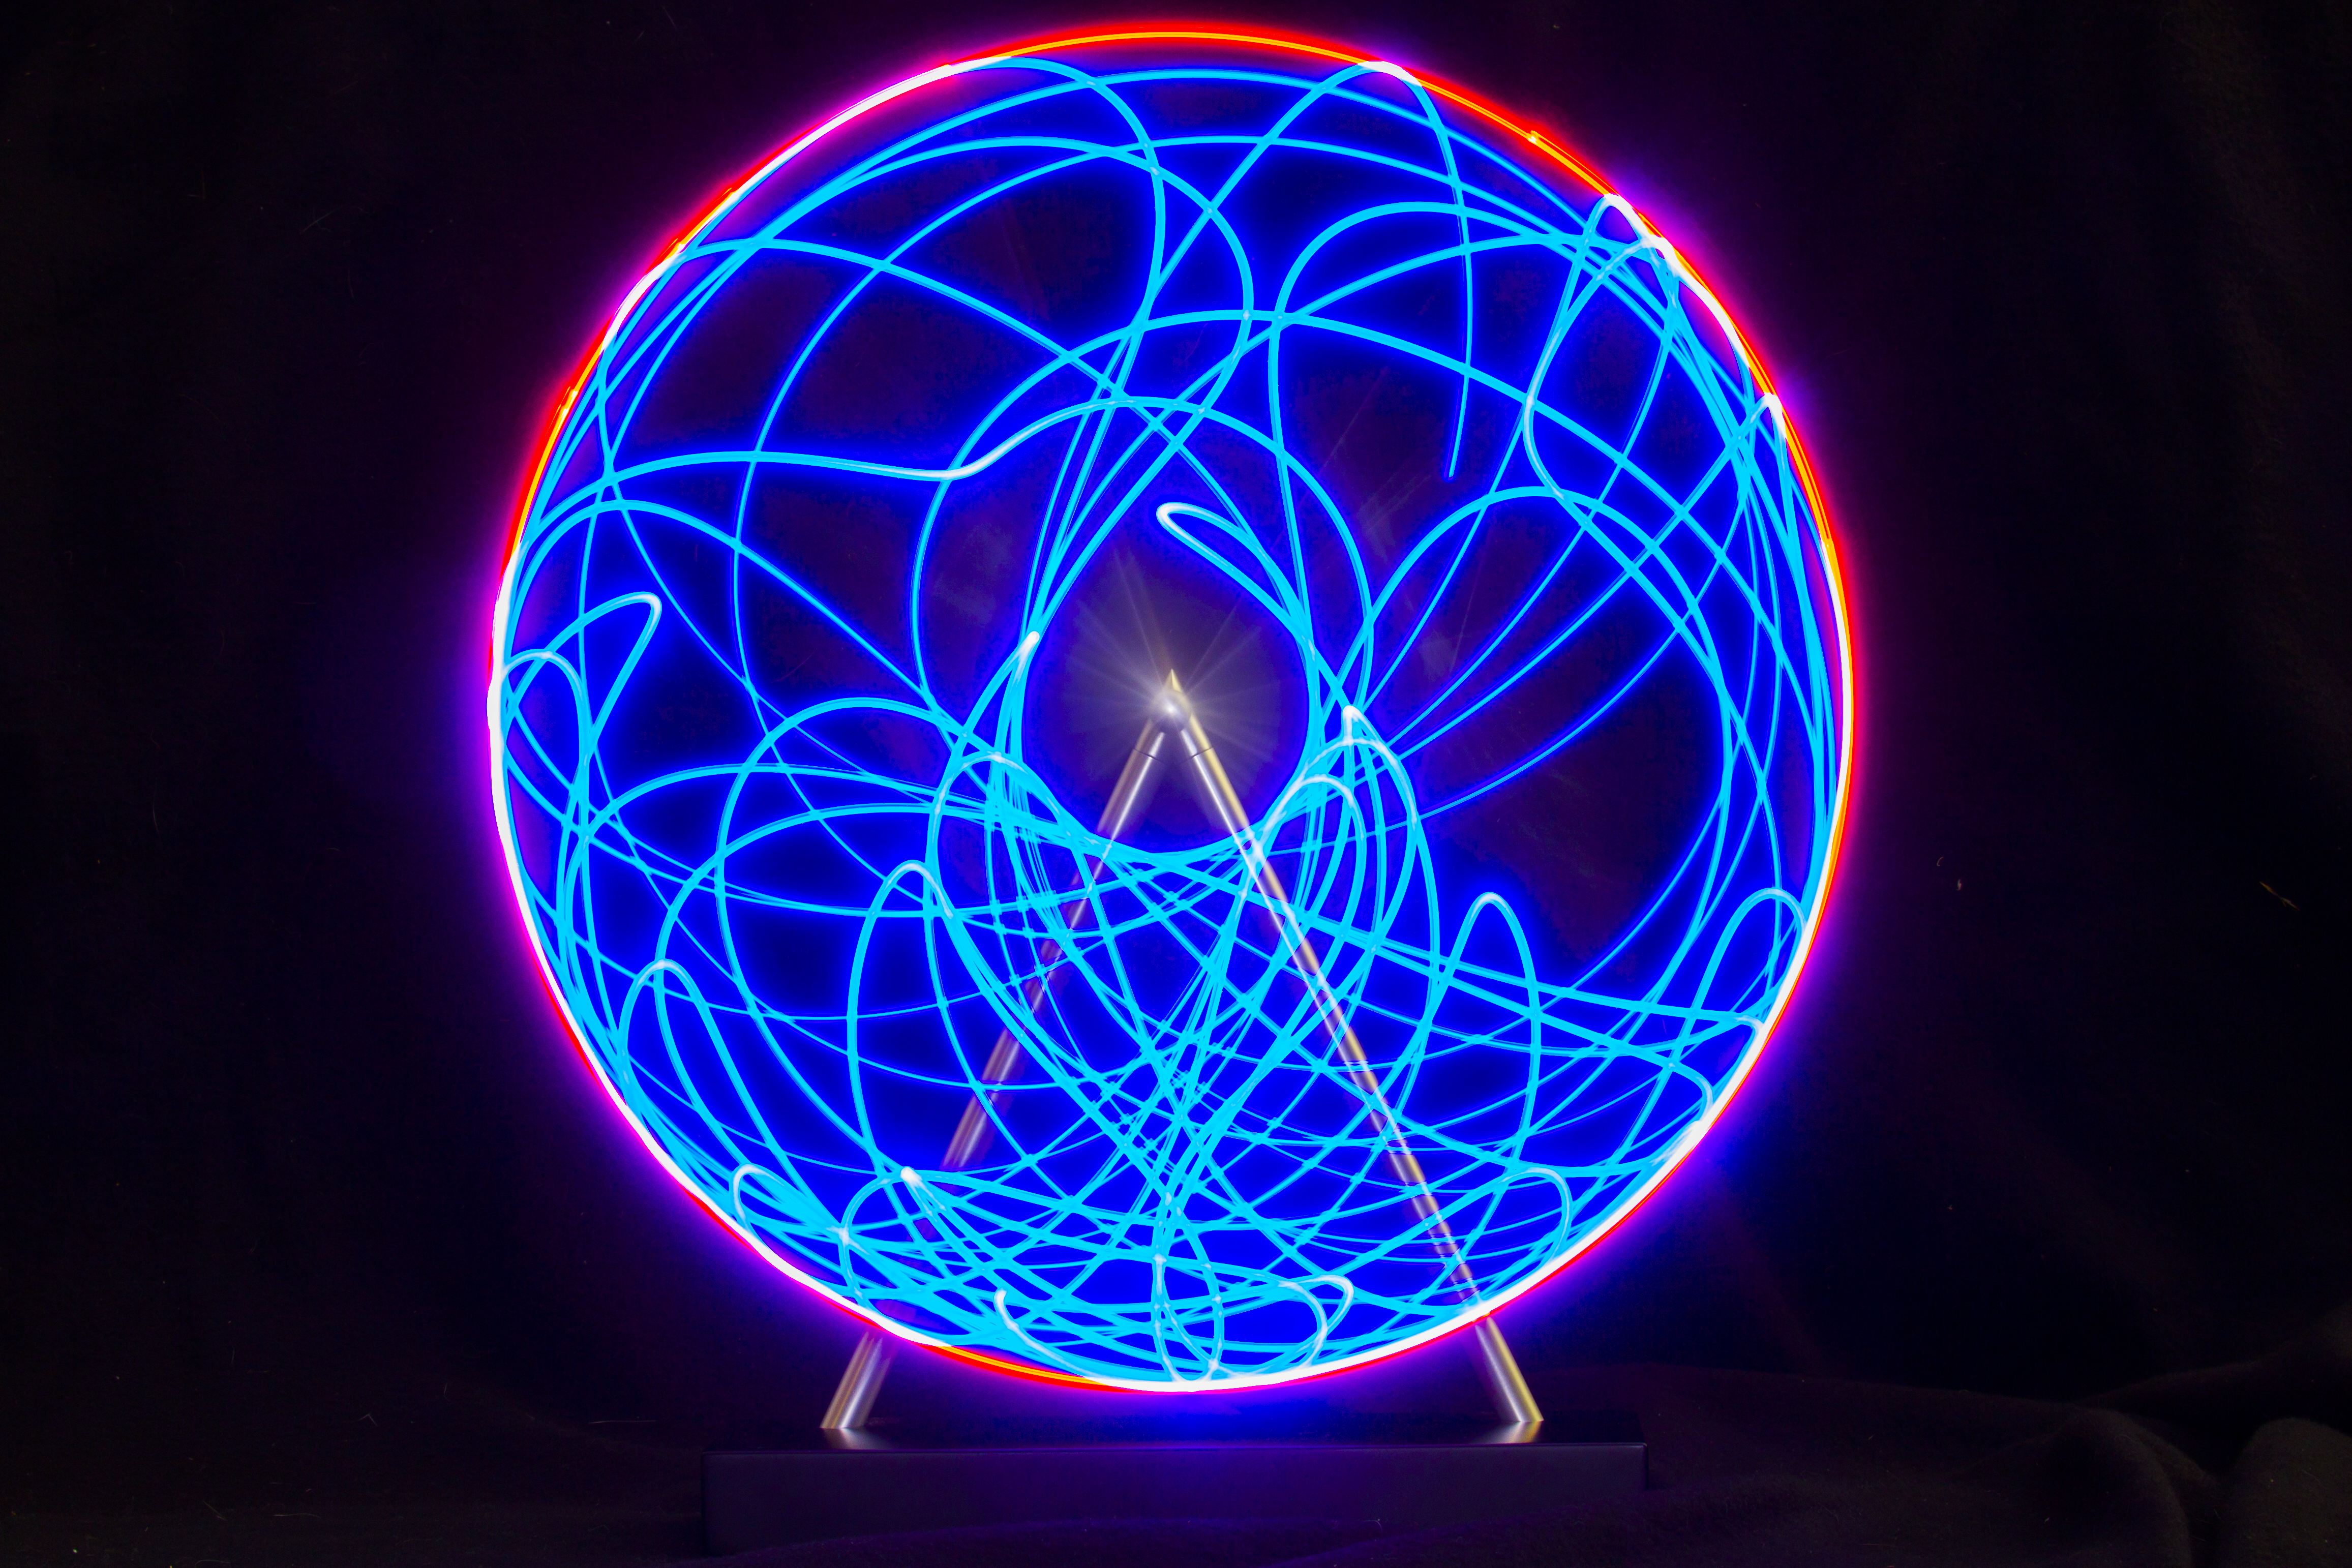 Blue
light trail of the tip of the second part of a double pendulum, with
the path looking chaotic and somewhat uniformly spread out over an annulus